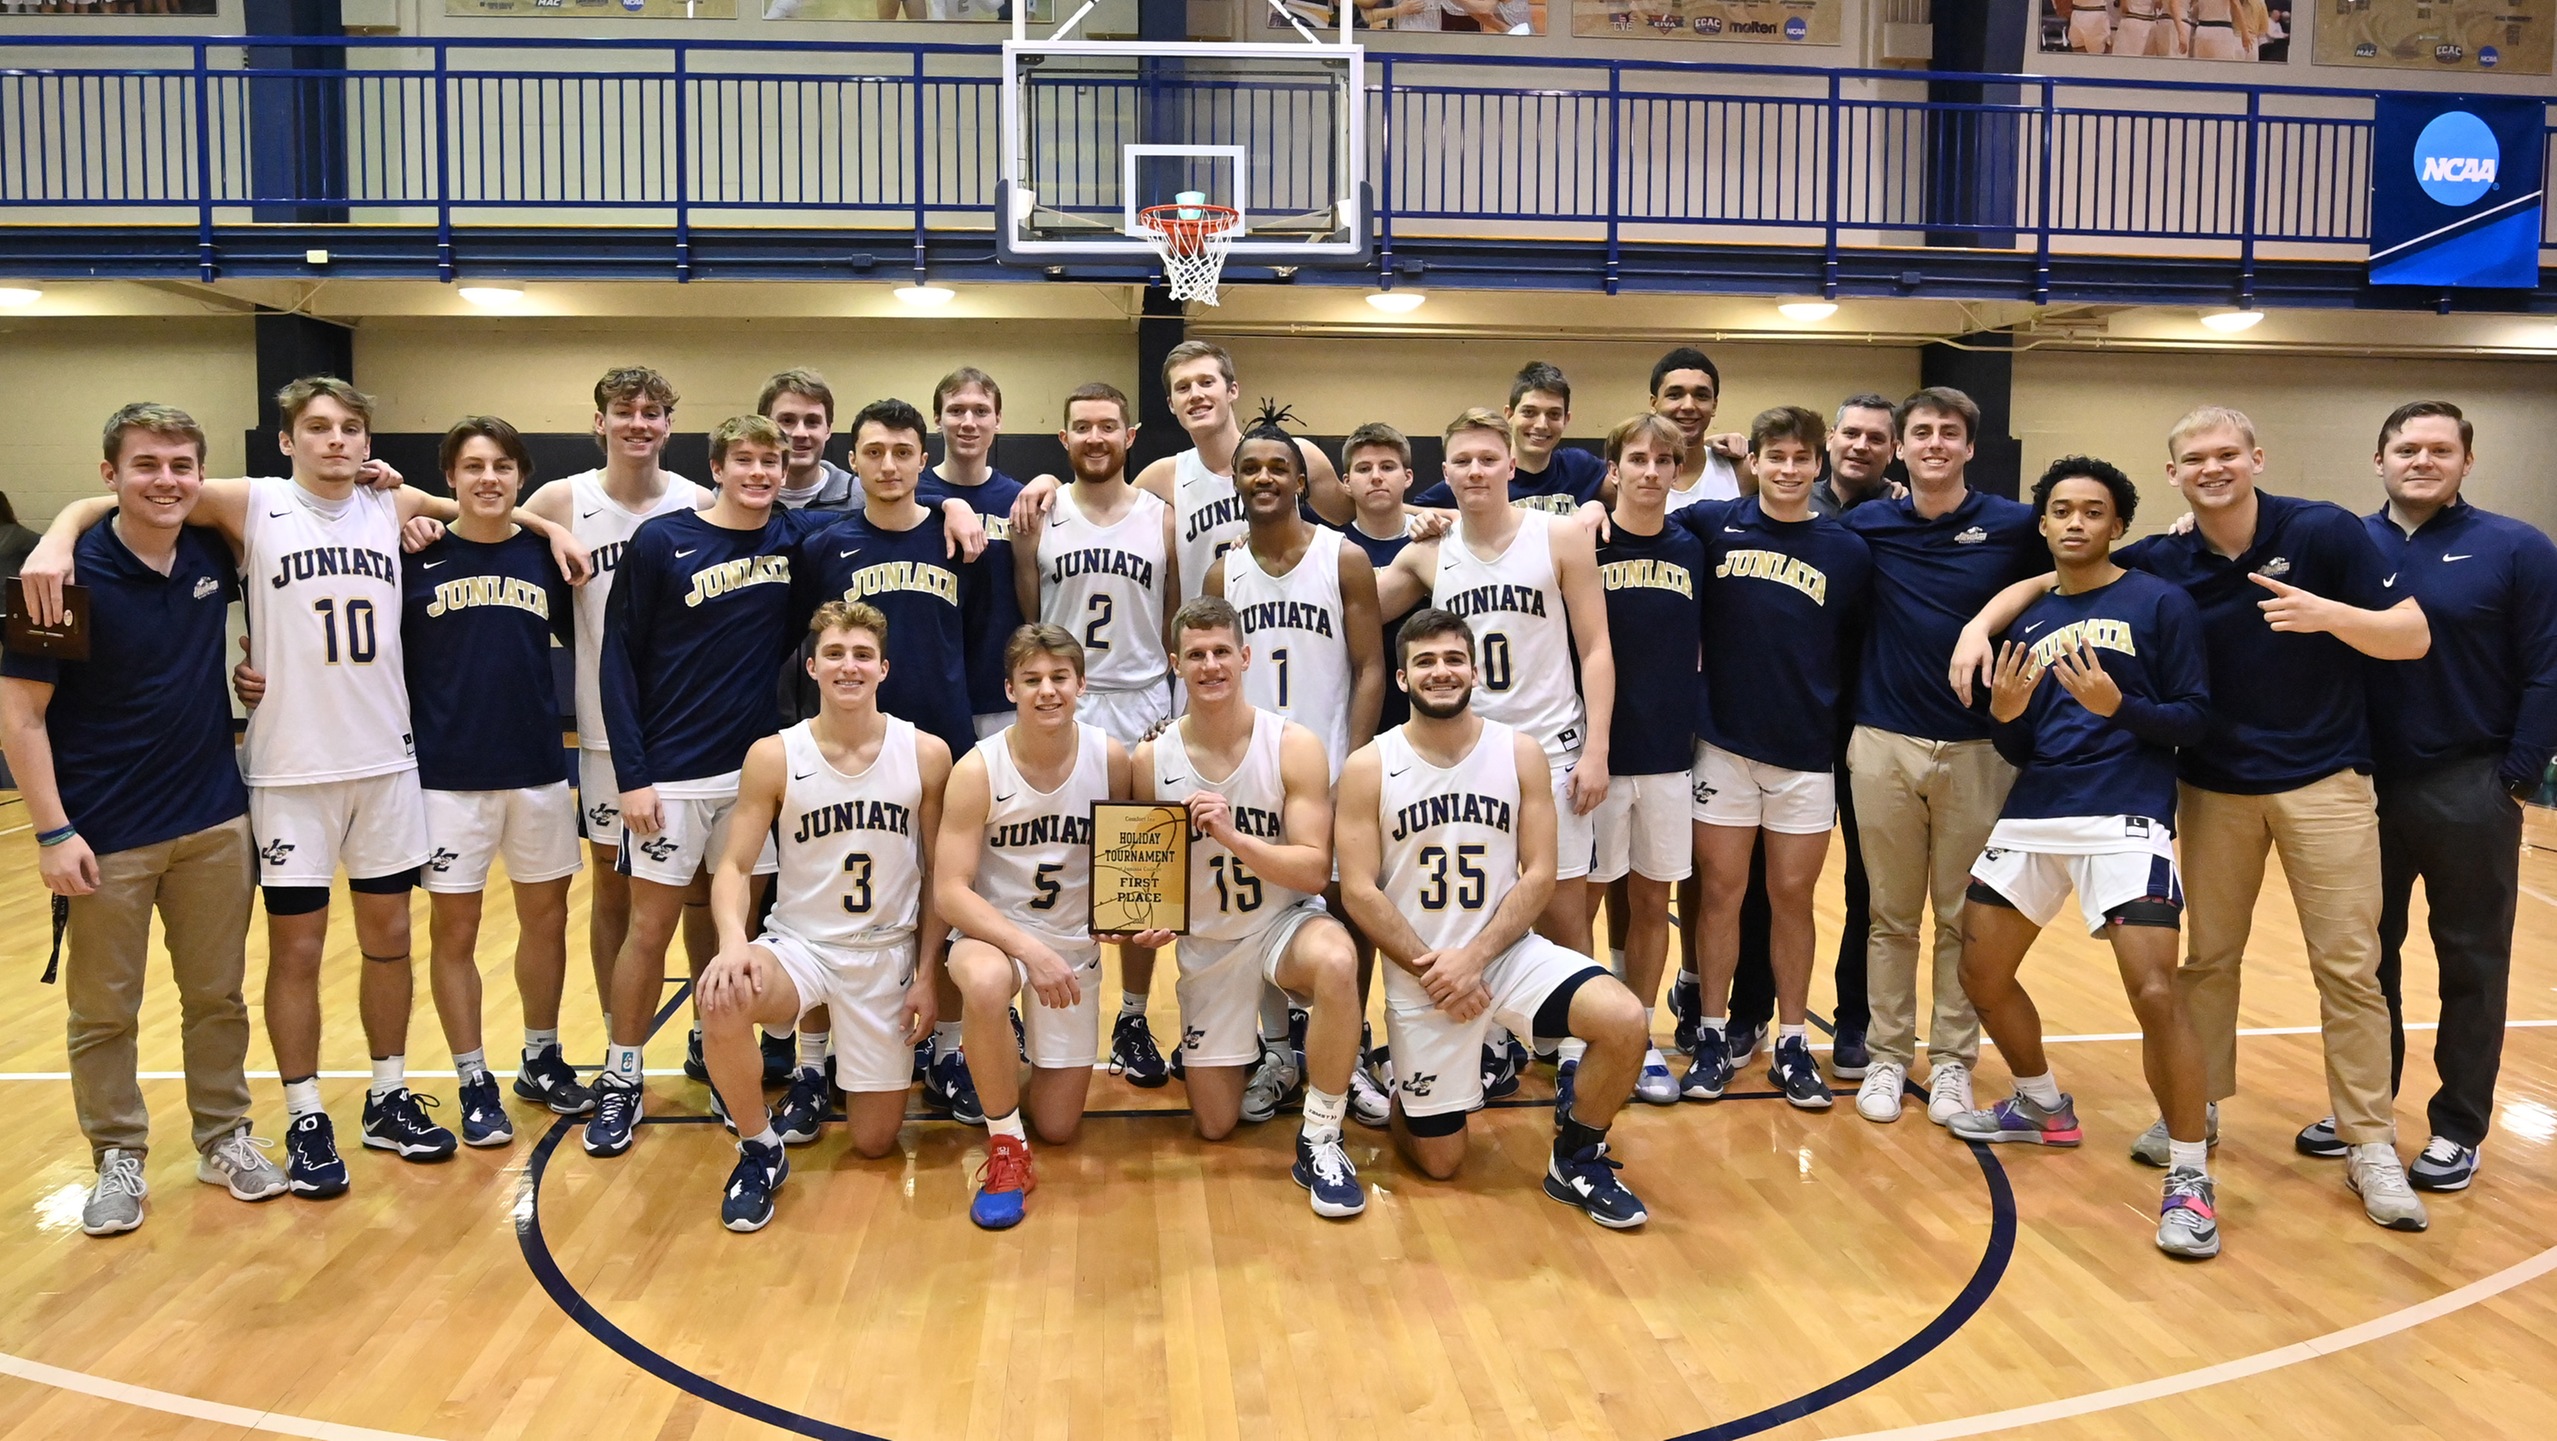 Eagles Takedown Griffins to Win Comfort Inn Holiday Tournament